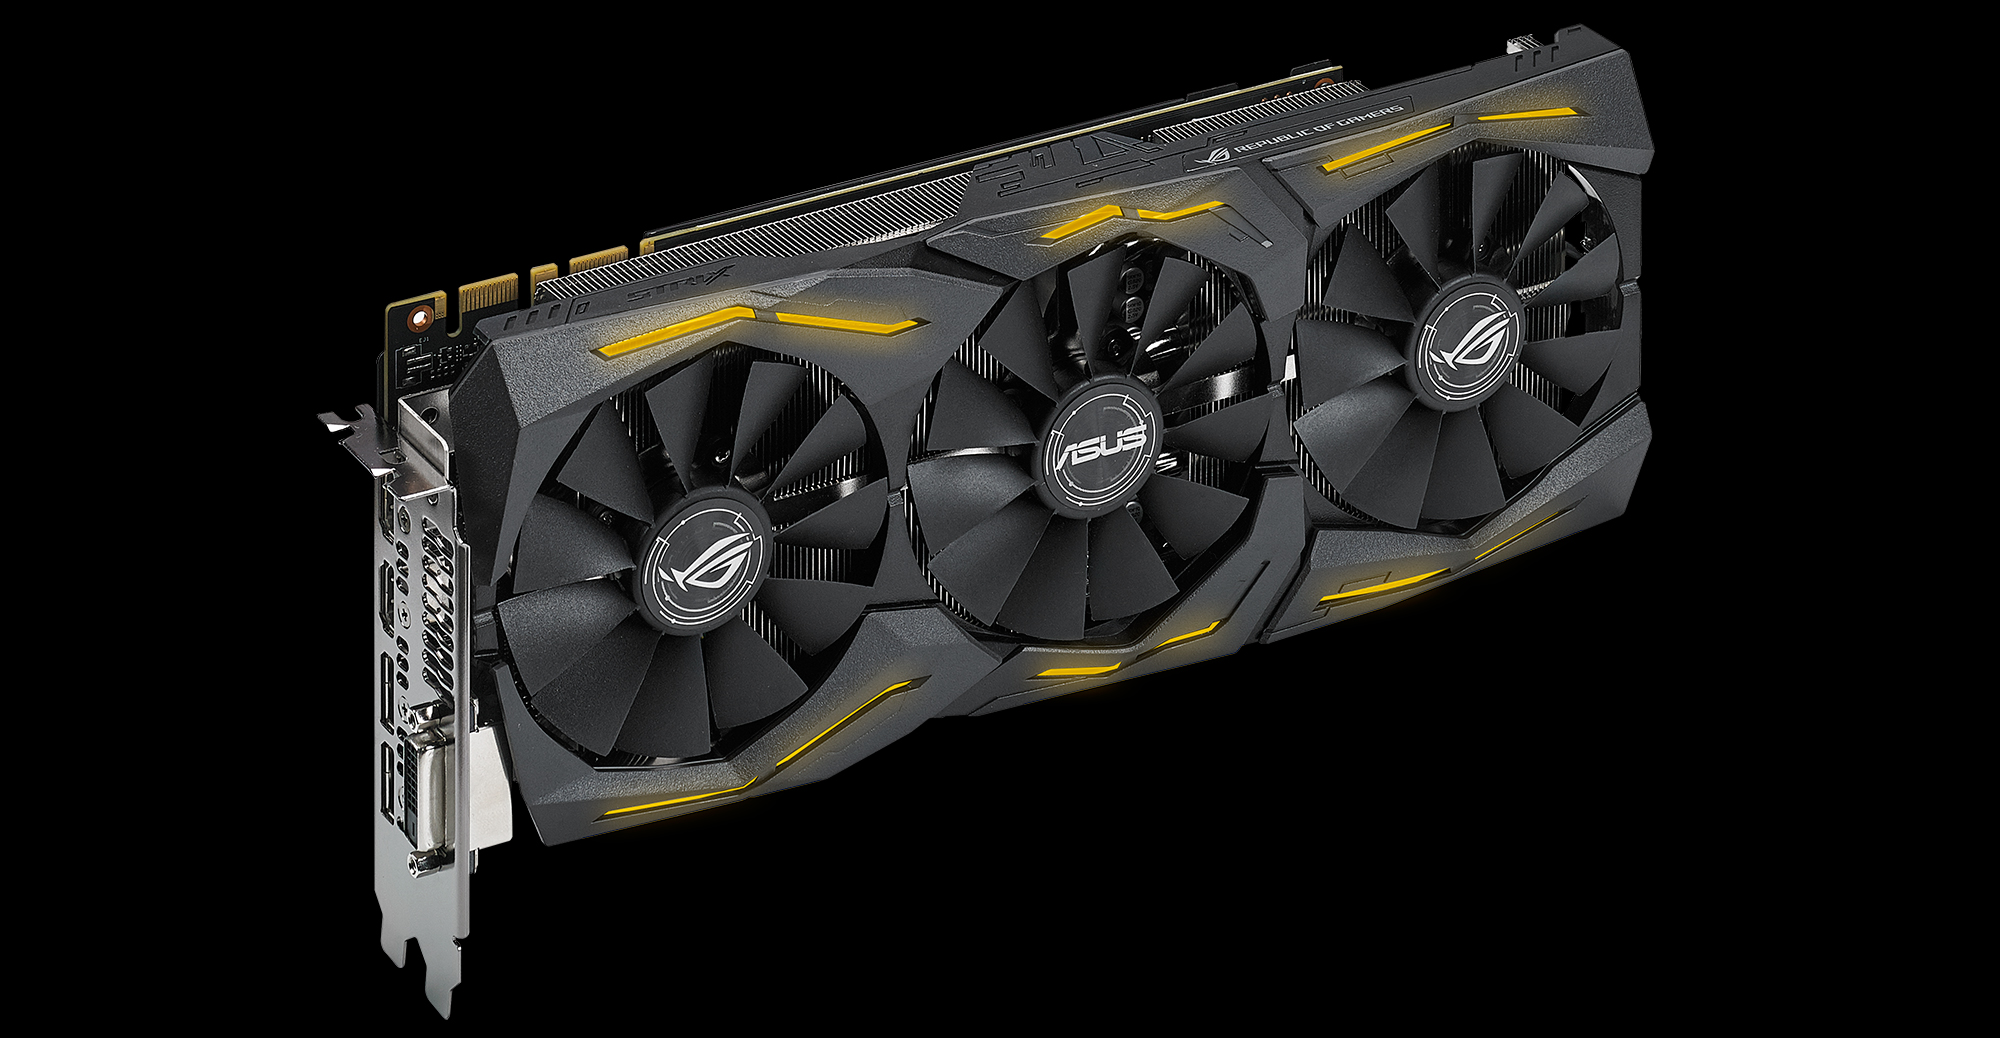 Media asset in full size related to 3dfxzone.it news item entitled as follows: ASUS annuncia due video card Republic of Gamers Strix GeForce GTX 1080 | Image Name: news24334_ASUS-ROG-Strix-GeForce-GTX-1080_3.jpg